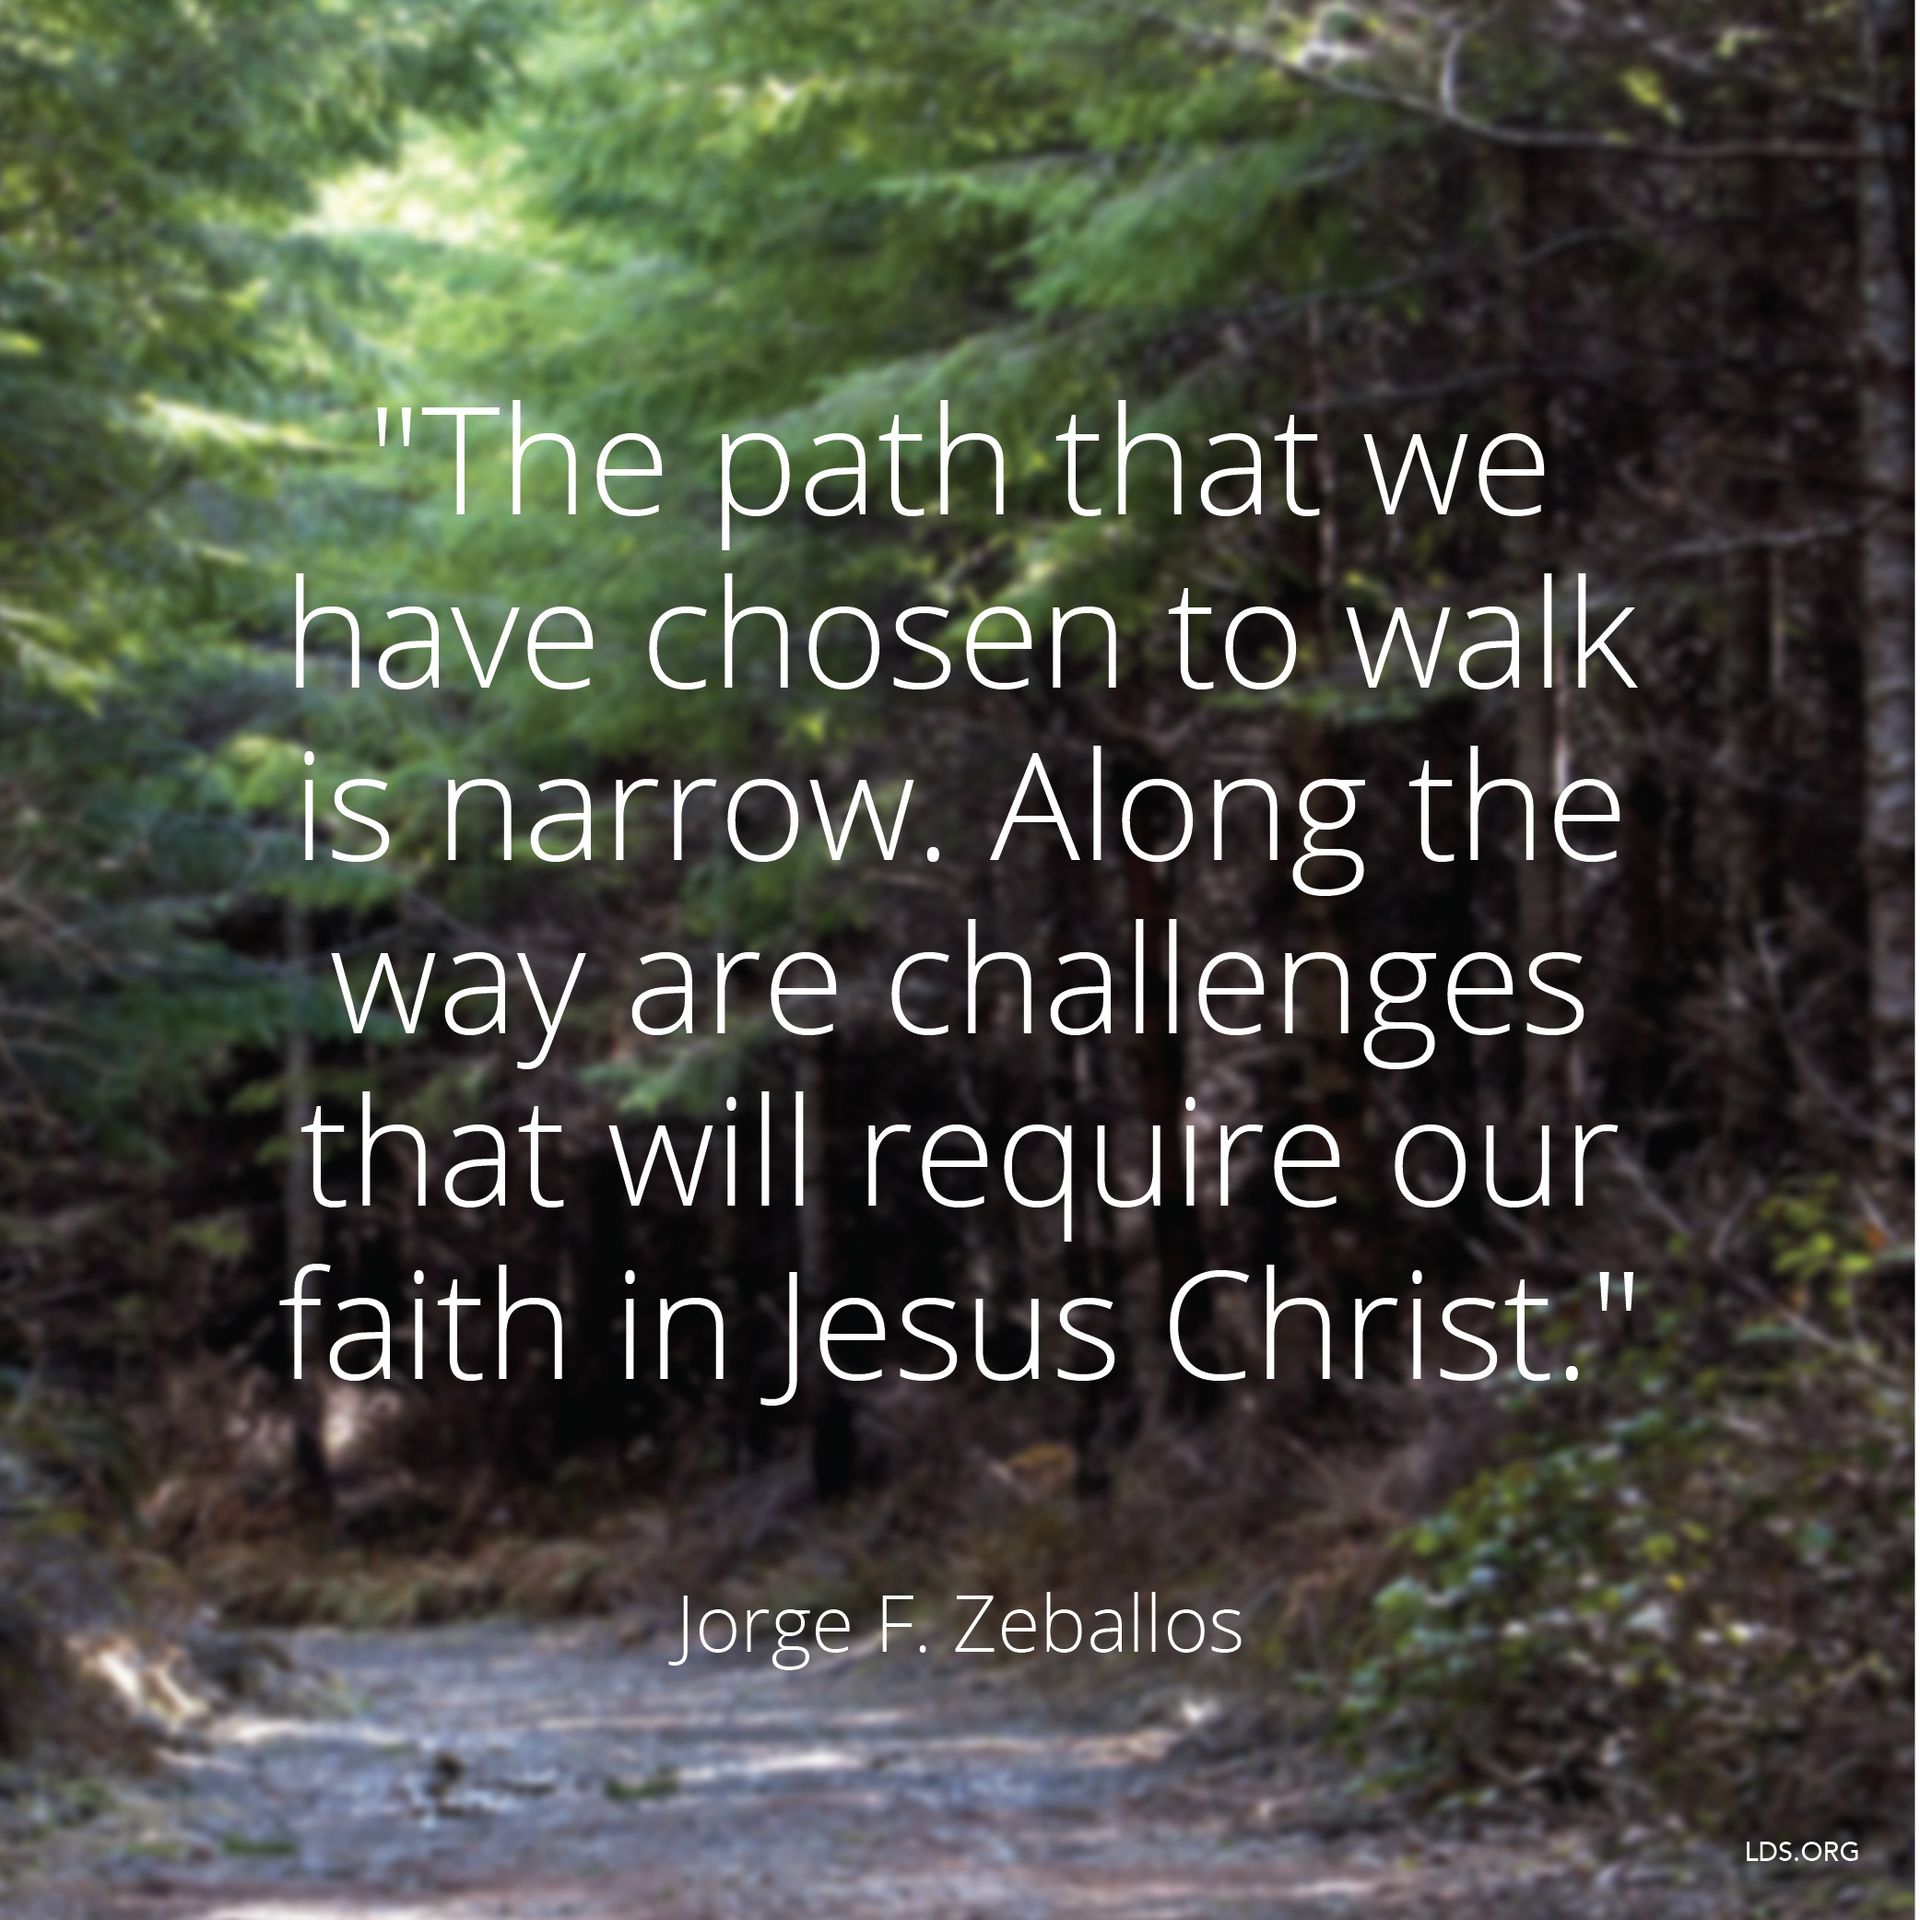 “The path that we have chosen to walk is narrow. Along the way are challenges that will require our faith in Jesus Christ.”—Elder Jorge F. Zeballos, “If You Will Be Responsible” © undefined ipCode 1.